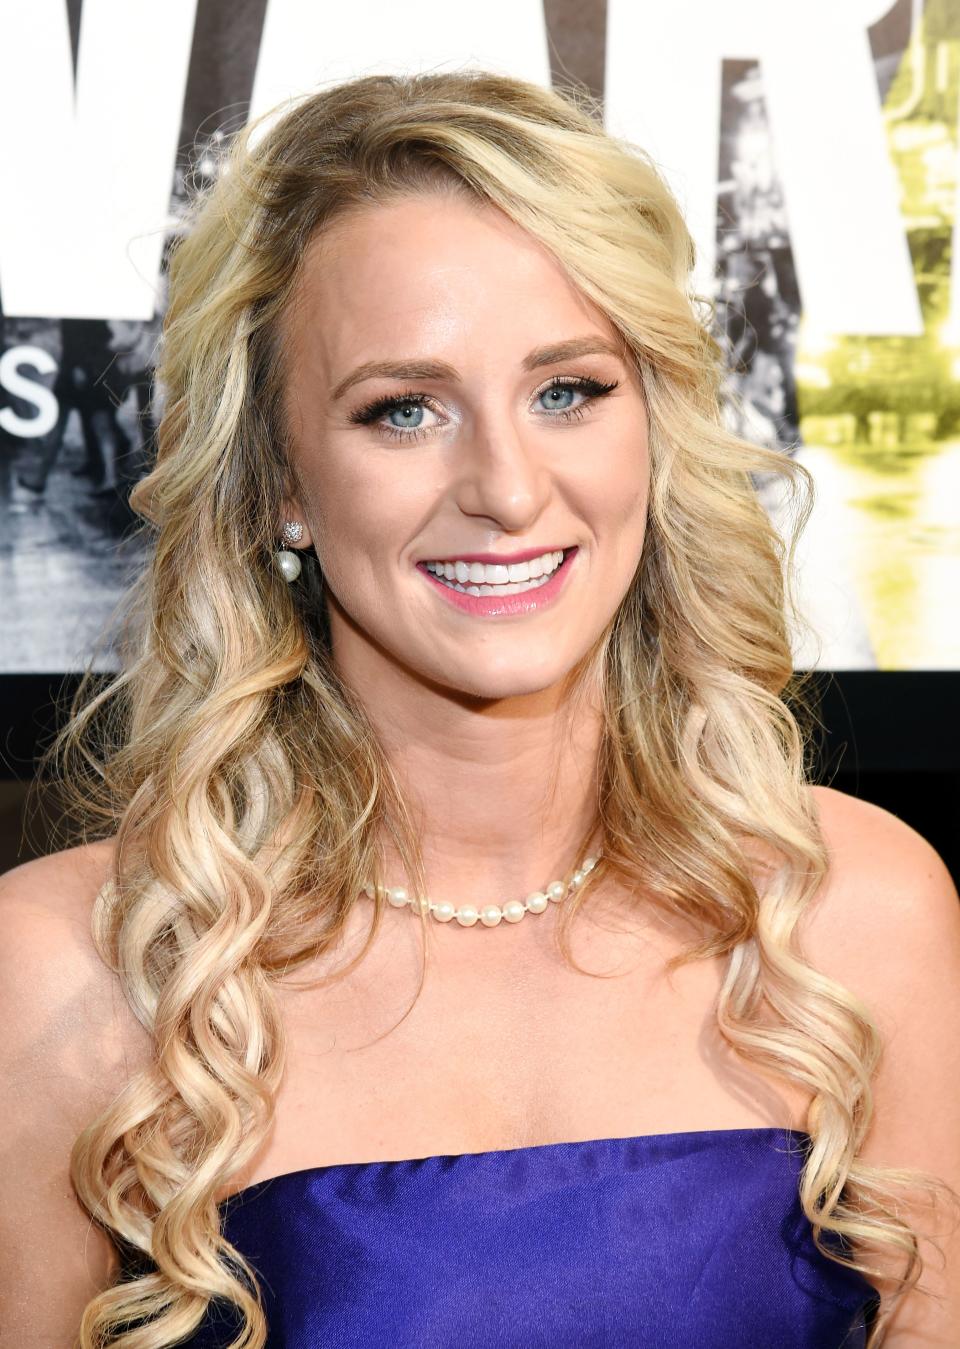 Leah Messer looking amazing in a close view shot from the paparazzi, revealing her beautiful blue eyes